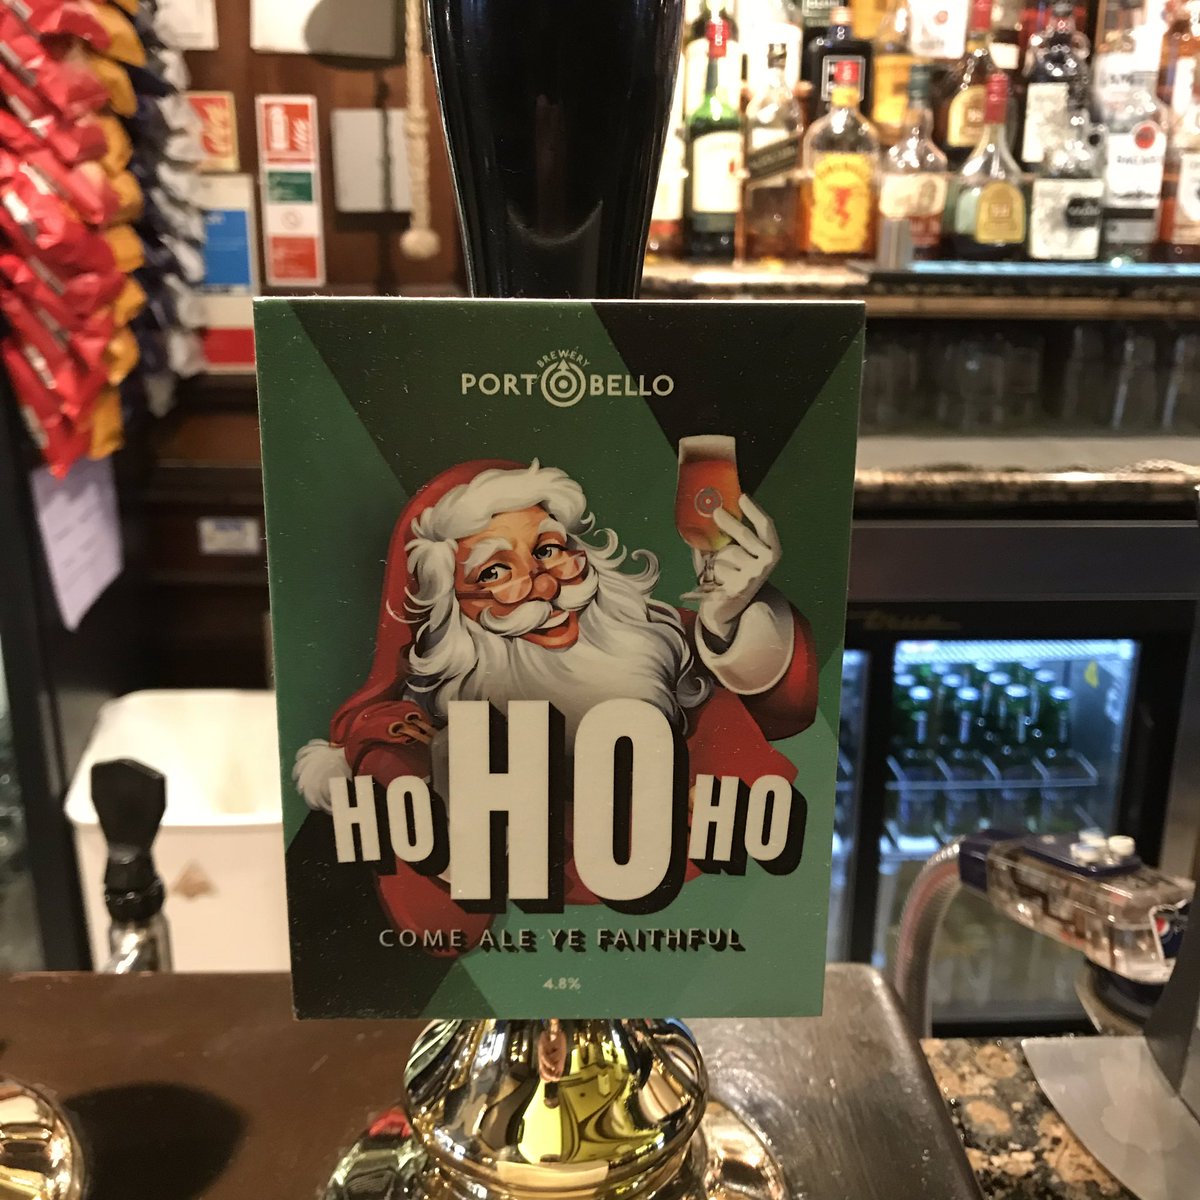 It’s a busy time in December, so it’s important to have some downtime. Which means me and the elves are going out on the piss for the afternoon 🍺🍺 Santa is starting with a pint of this #HoHoHo @PortobelloBeer